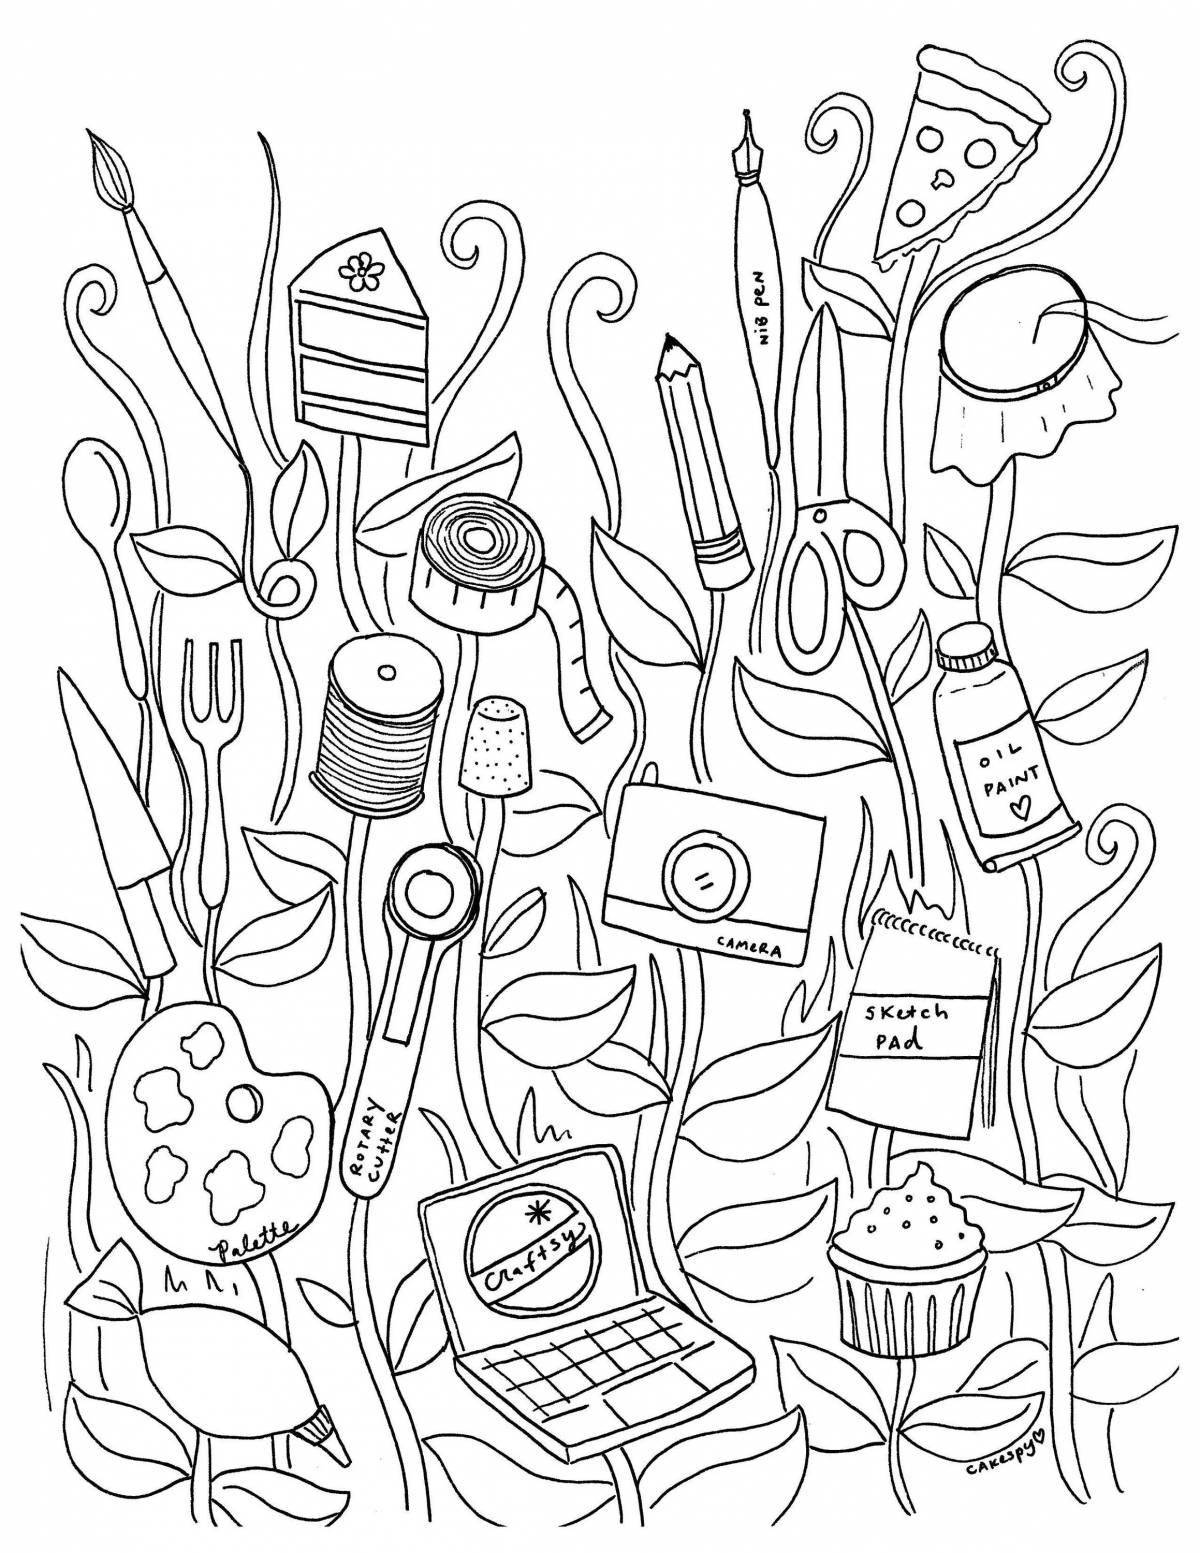 Bright coloring art page